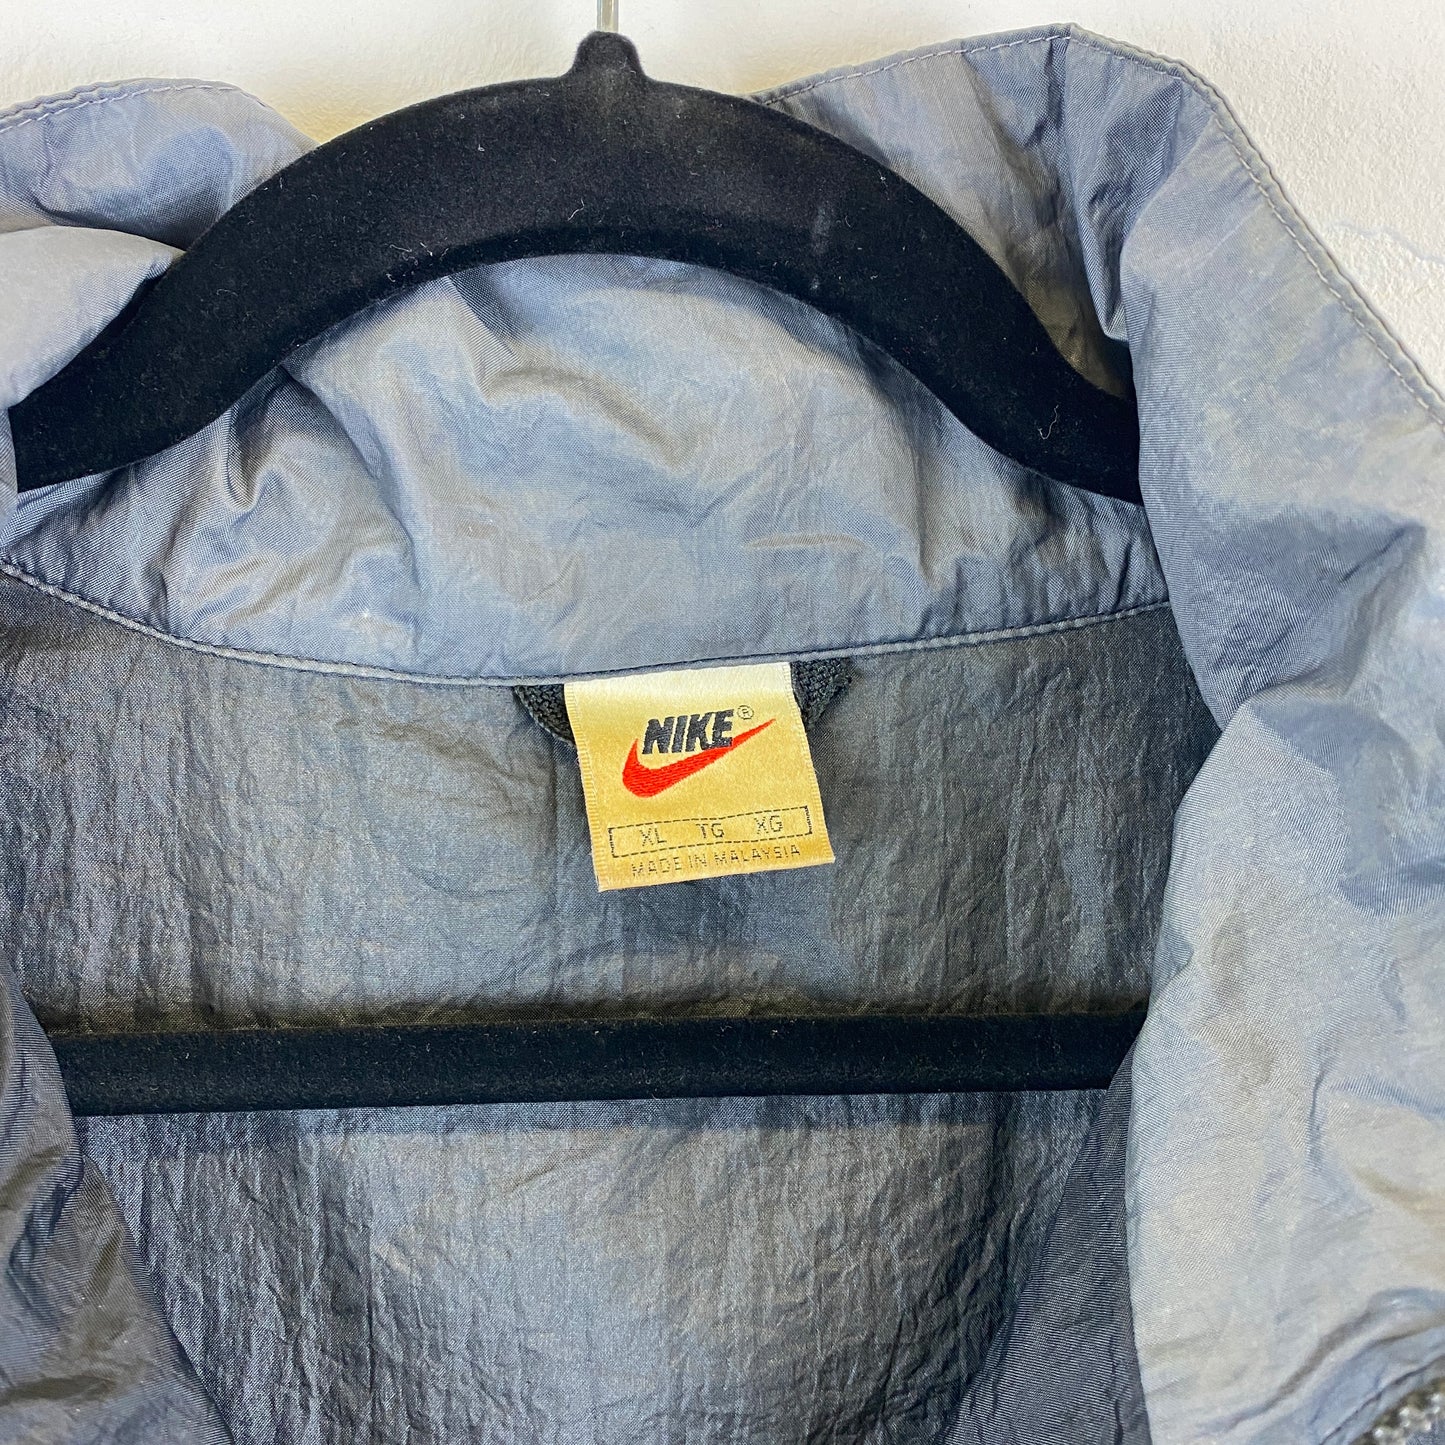 Nike RARE embroidered track jacket (XL)